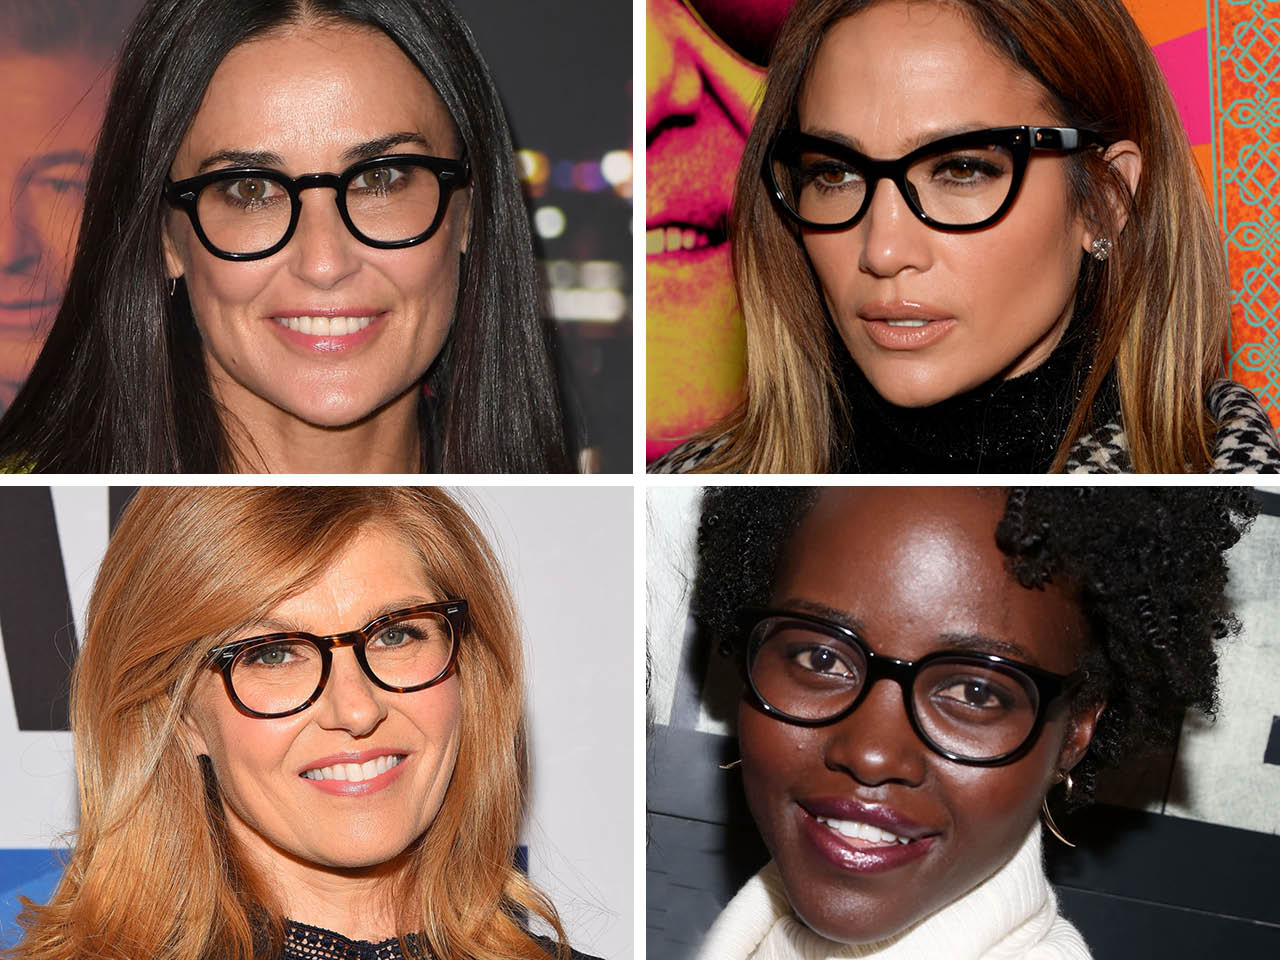 eye 2 - How to Select the Right Eyewear for Your Face Shape